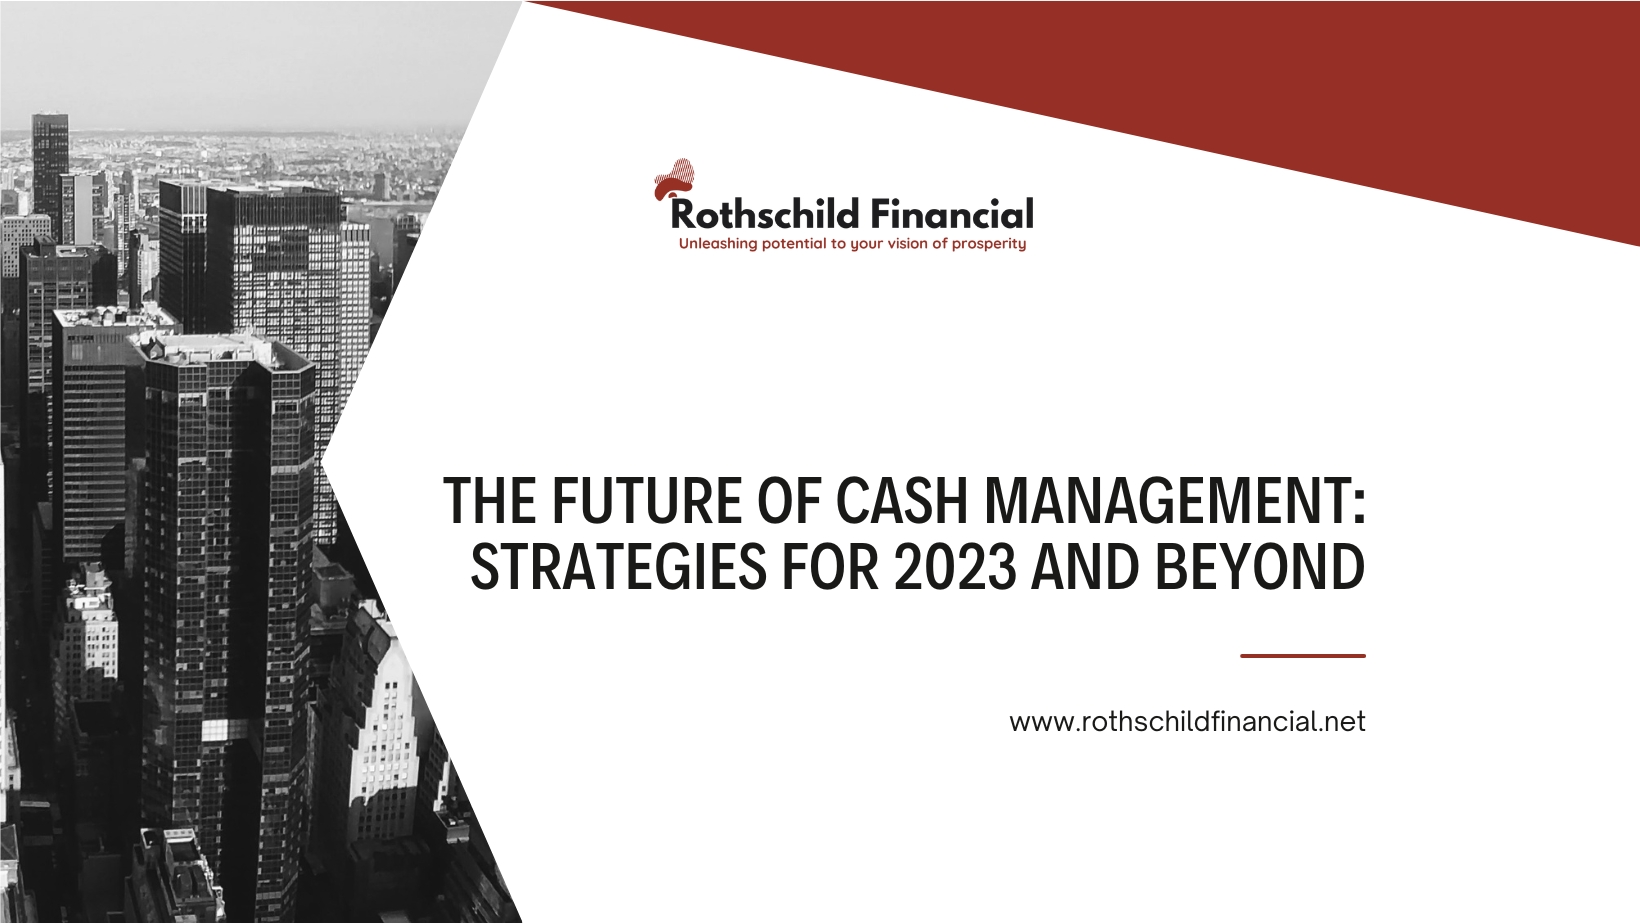 The Future of Cash Management- Strategies for 2023 and Beyond